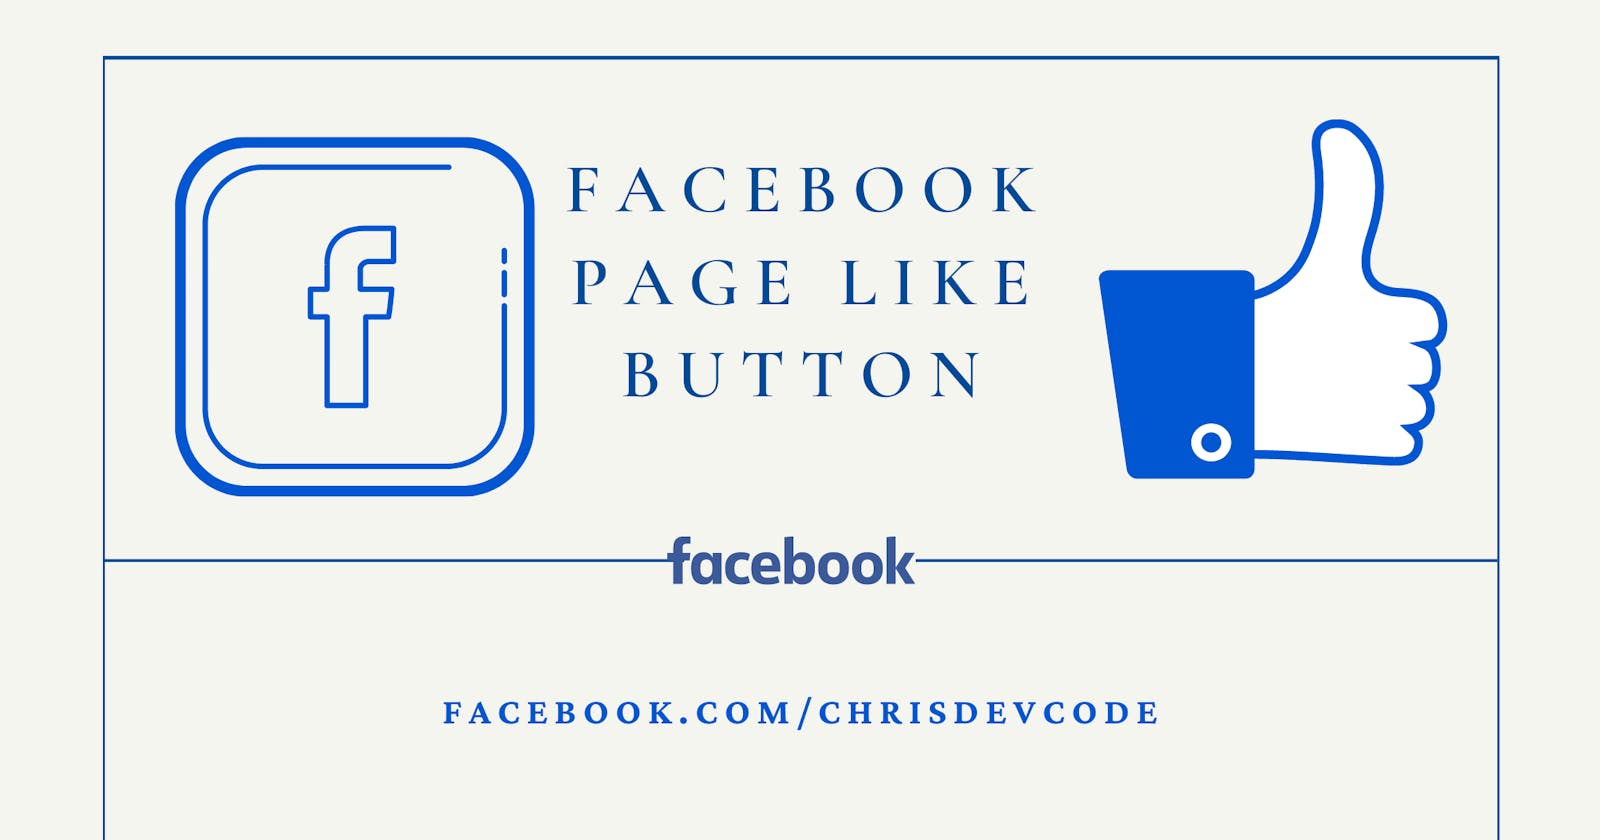 Facebook Page Like Button